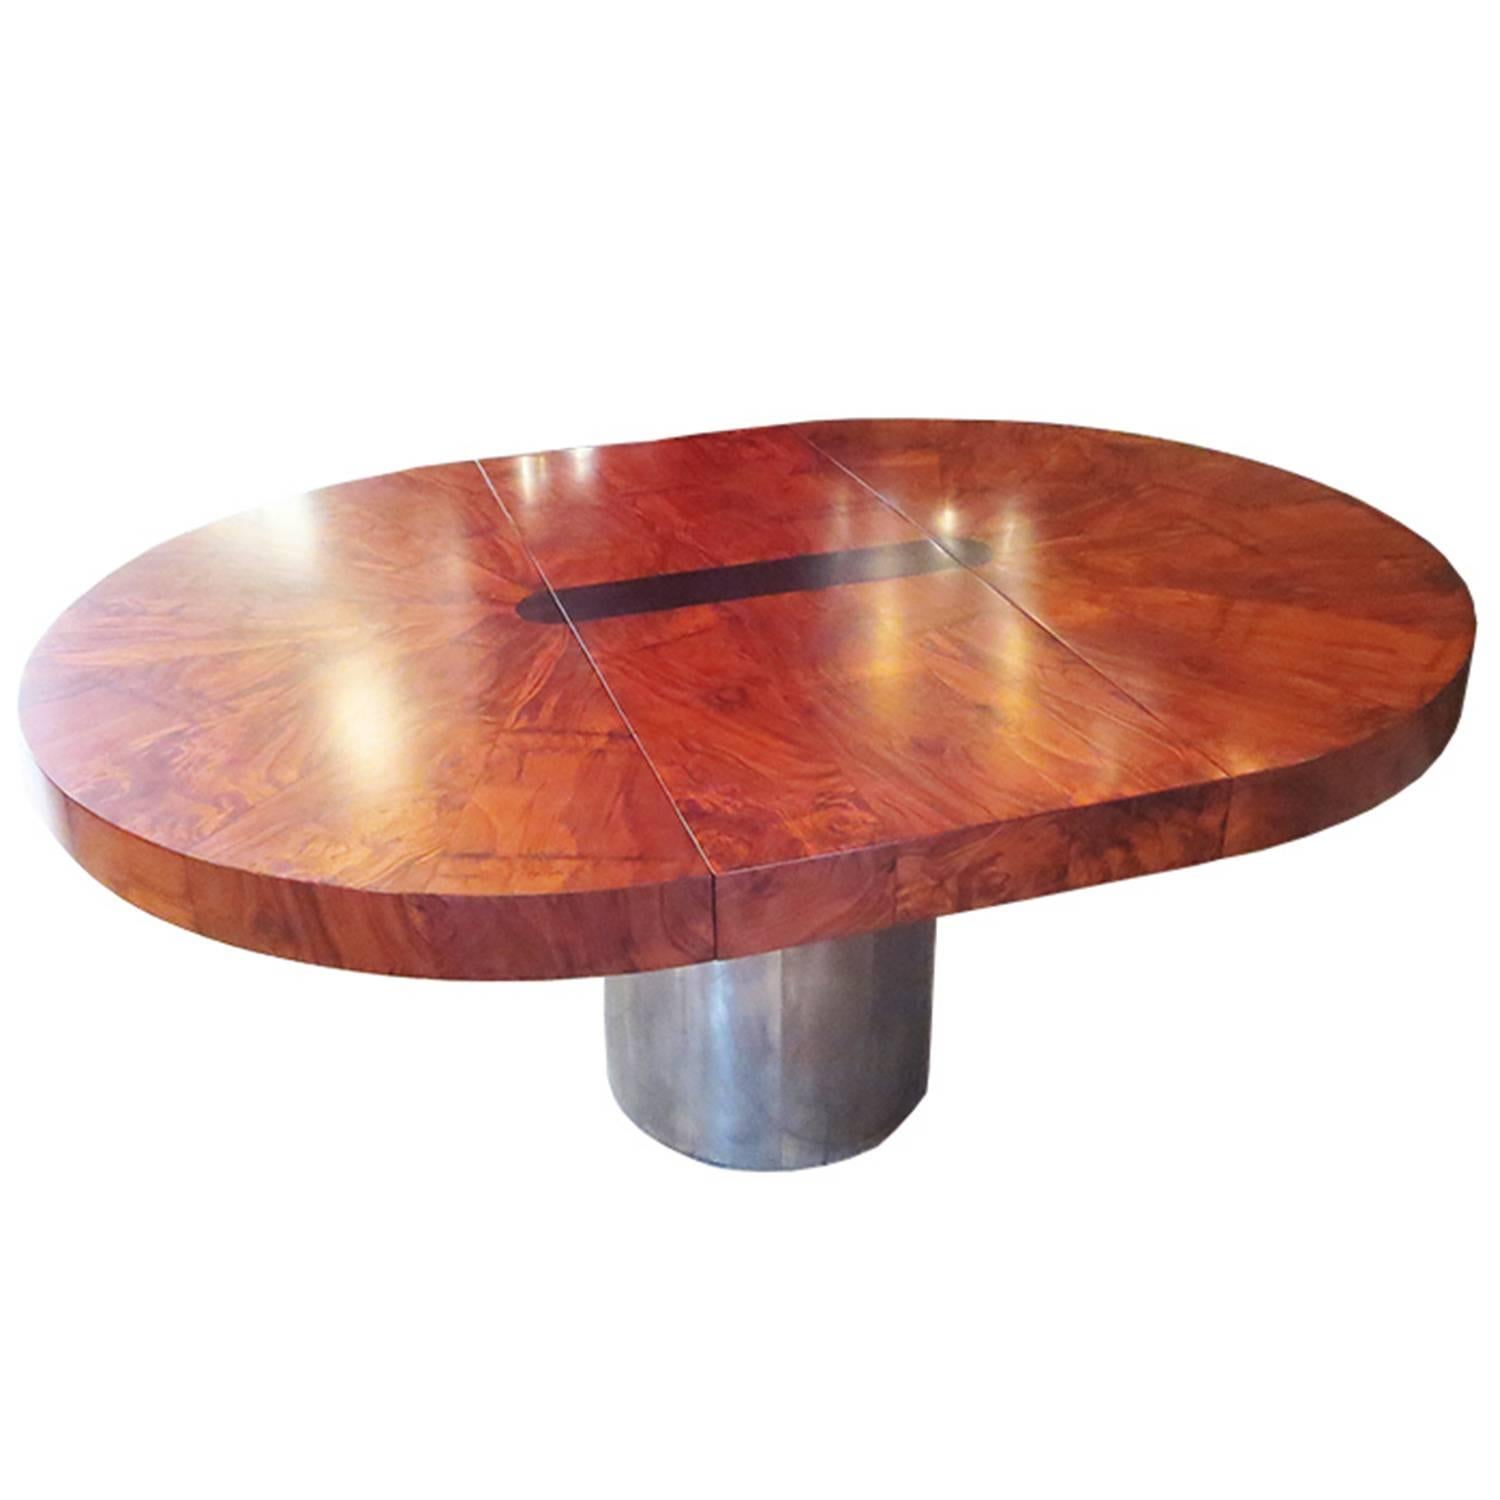 Lacquered Paul Evans Dining Table, Cityscape Burled Wood and Stainless Steel